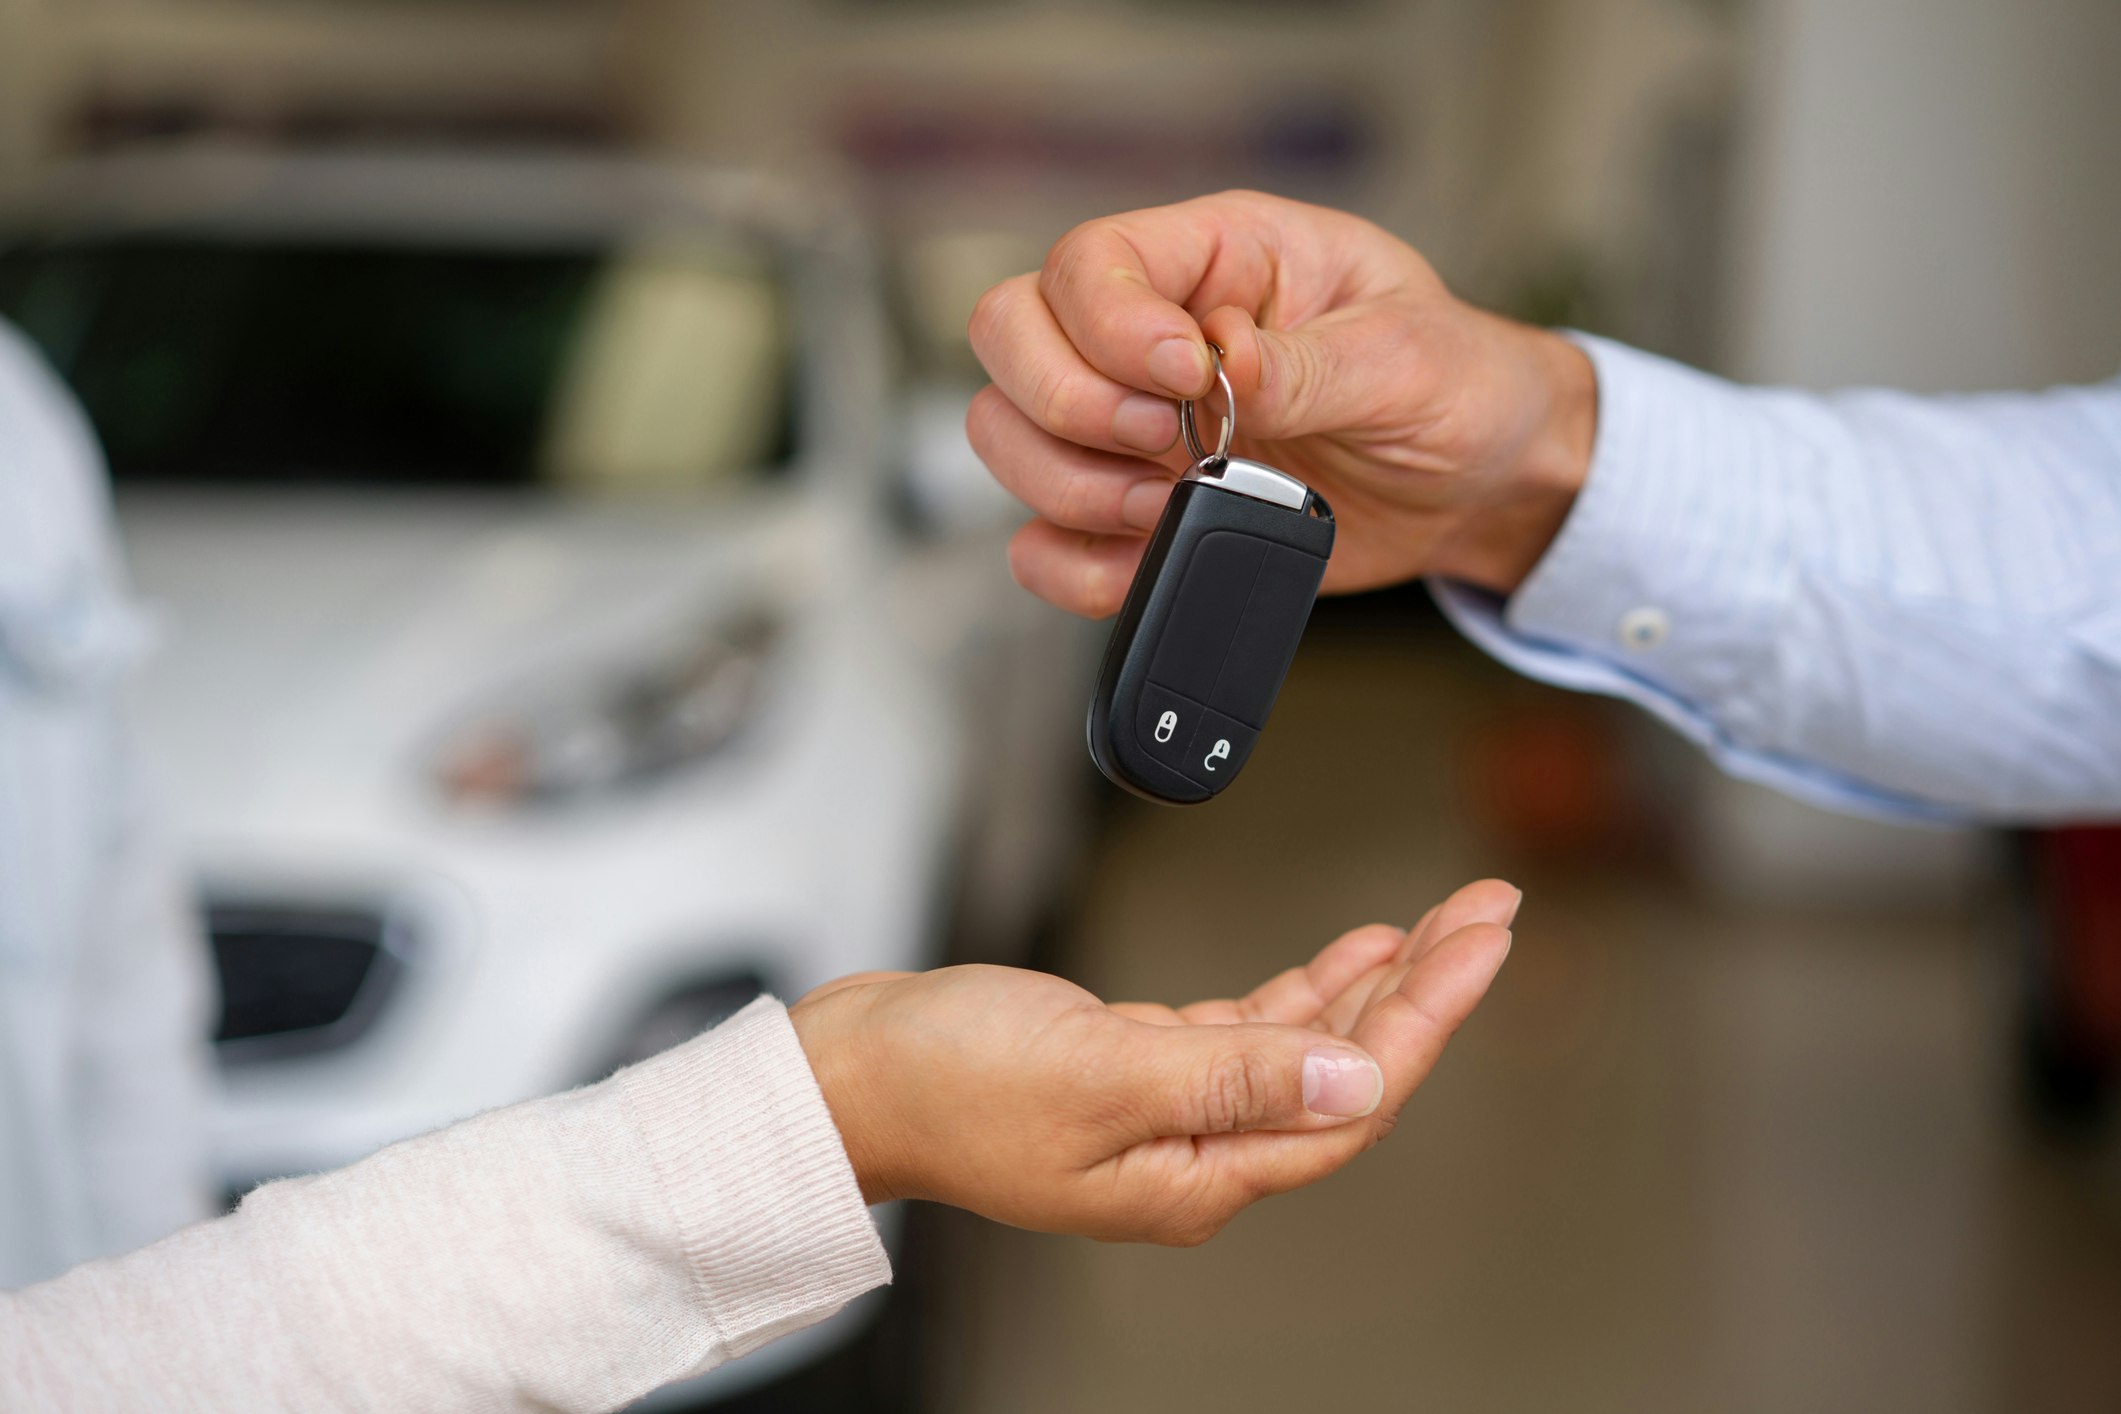 A person hands over a car key to another who has their hand cupped and under the key. In the background you can see a blurry image of a car.